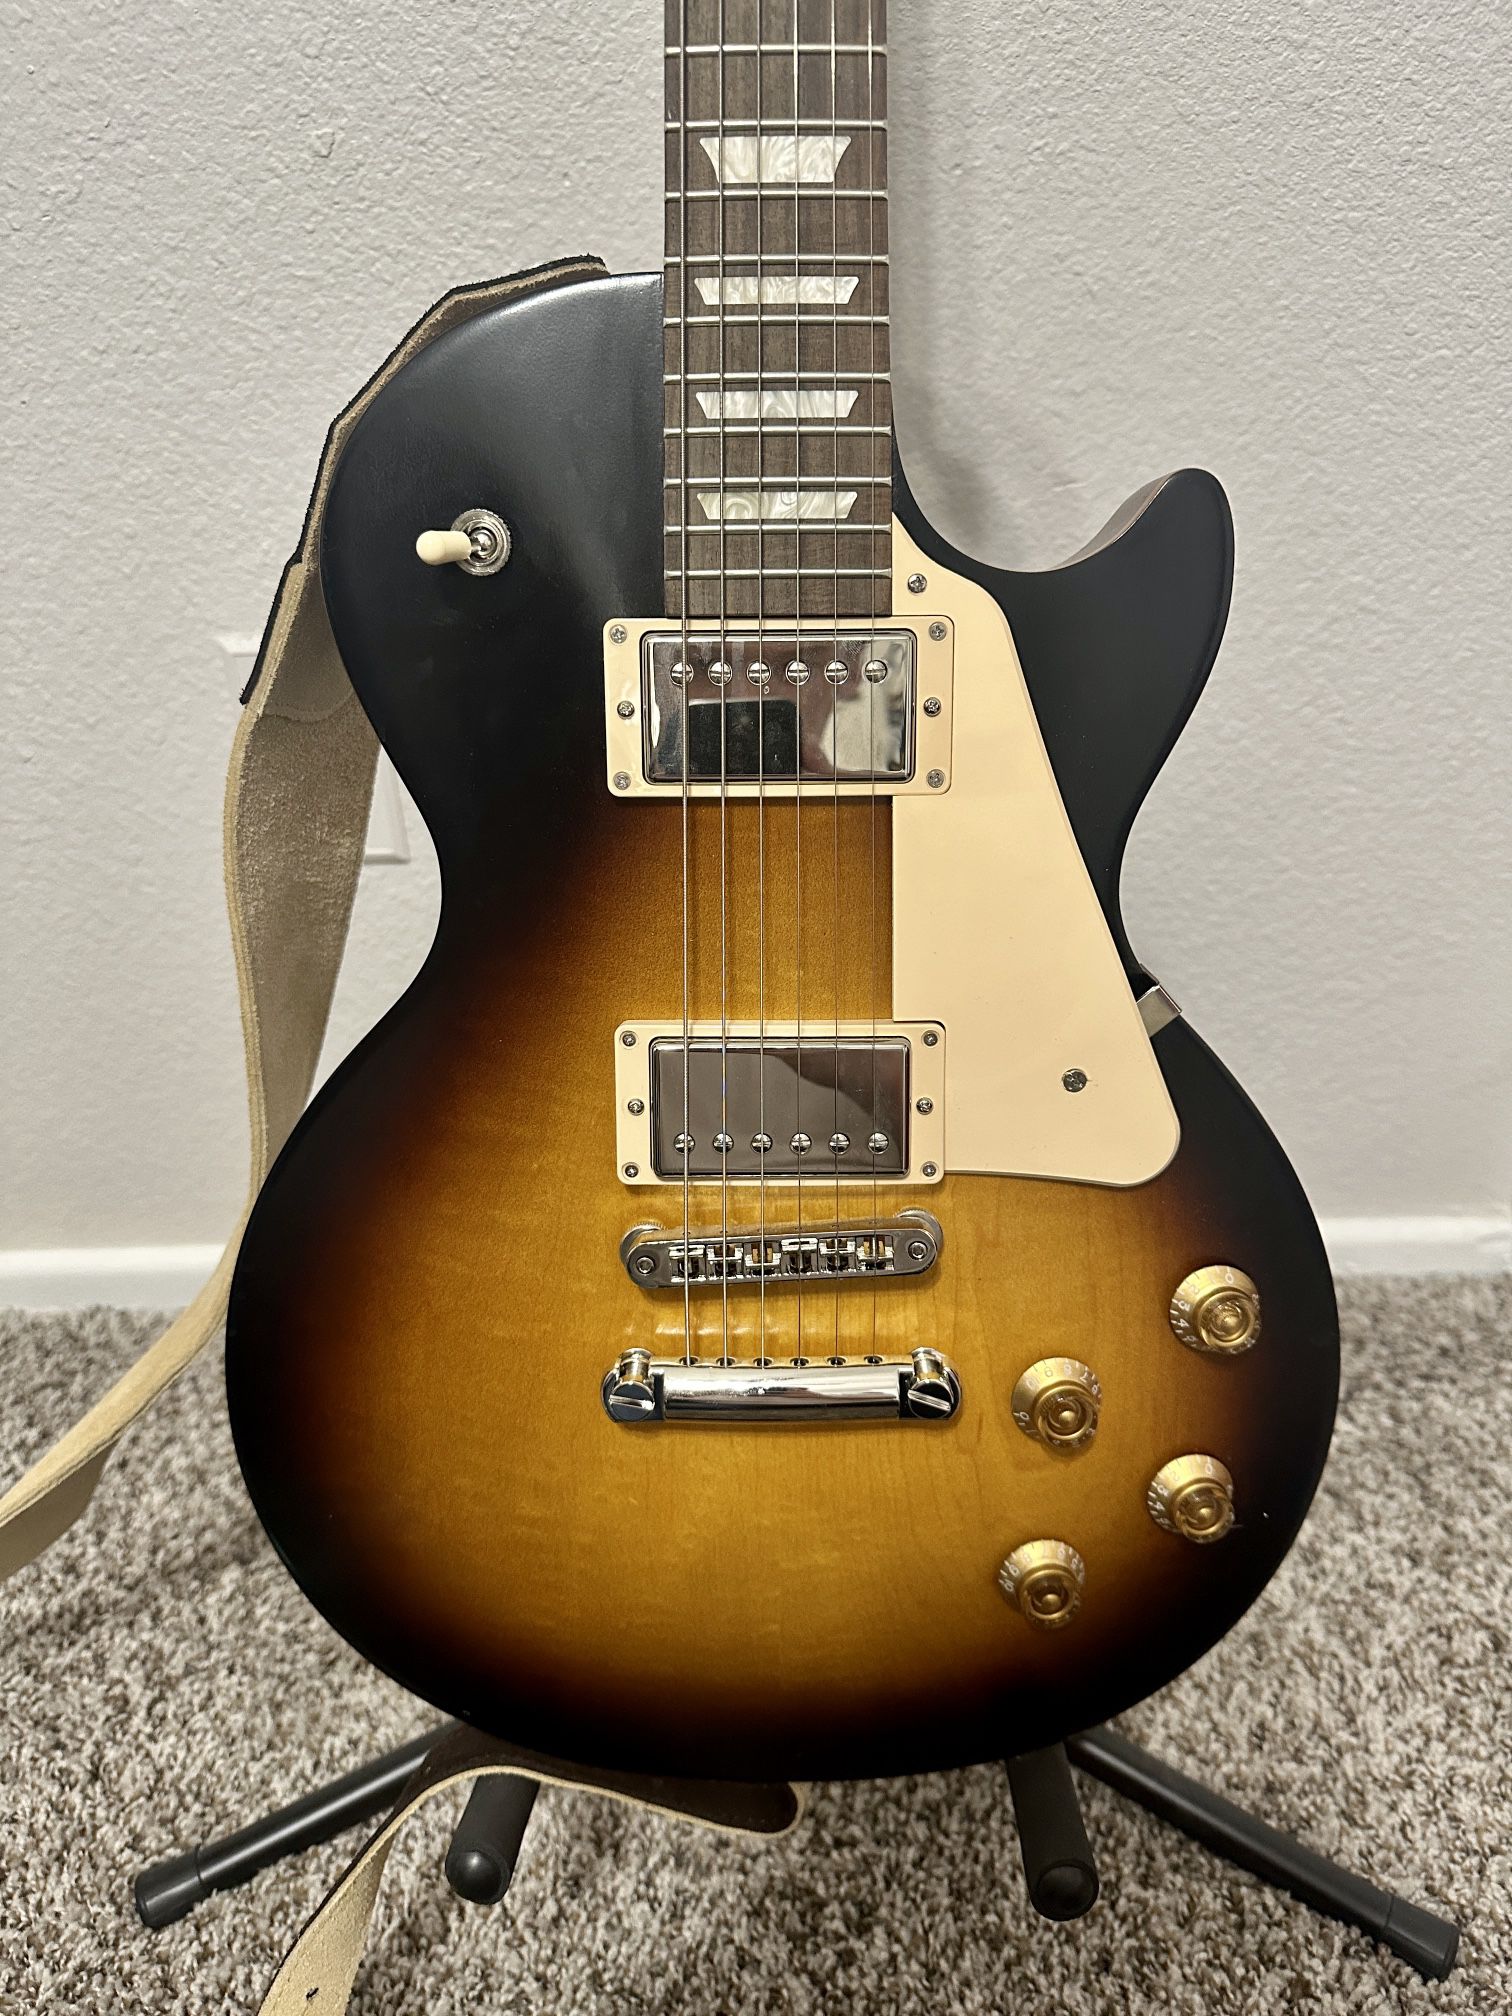 BARELY USED GIBSON LES PAUL TRIBUTE MODEL